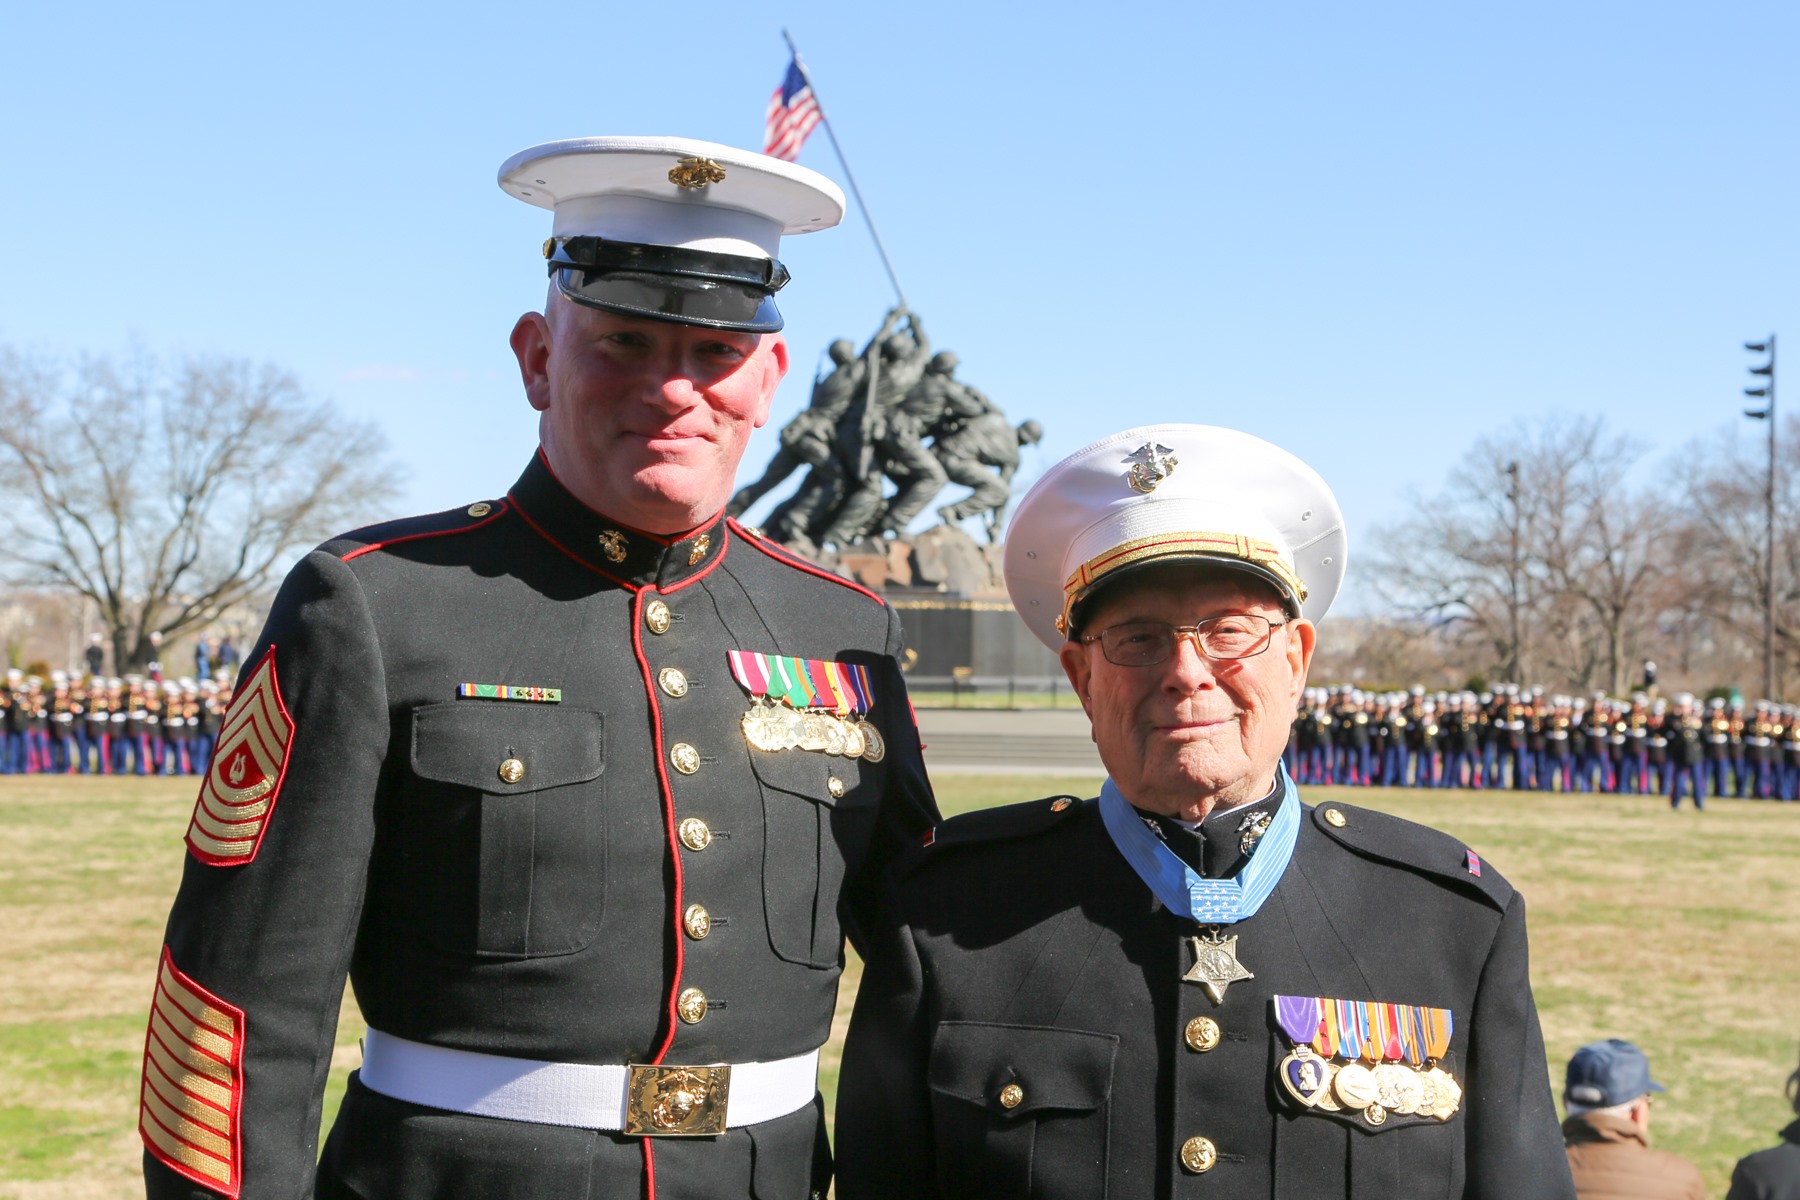 MGySgt Peter Wilson, U.S. Marine Band, with Medal of Honor Recipient and Iwo Jima Survivor Hershel Woodrow "Woody" Williams